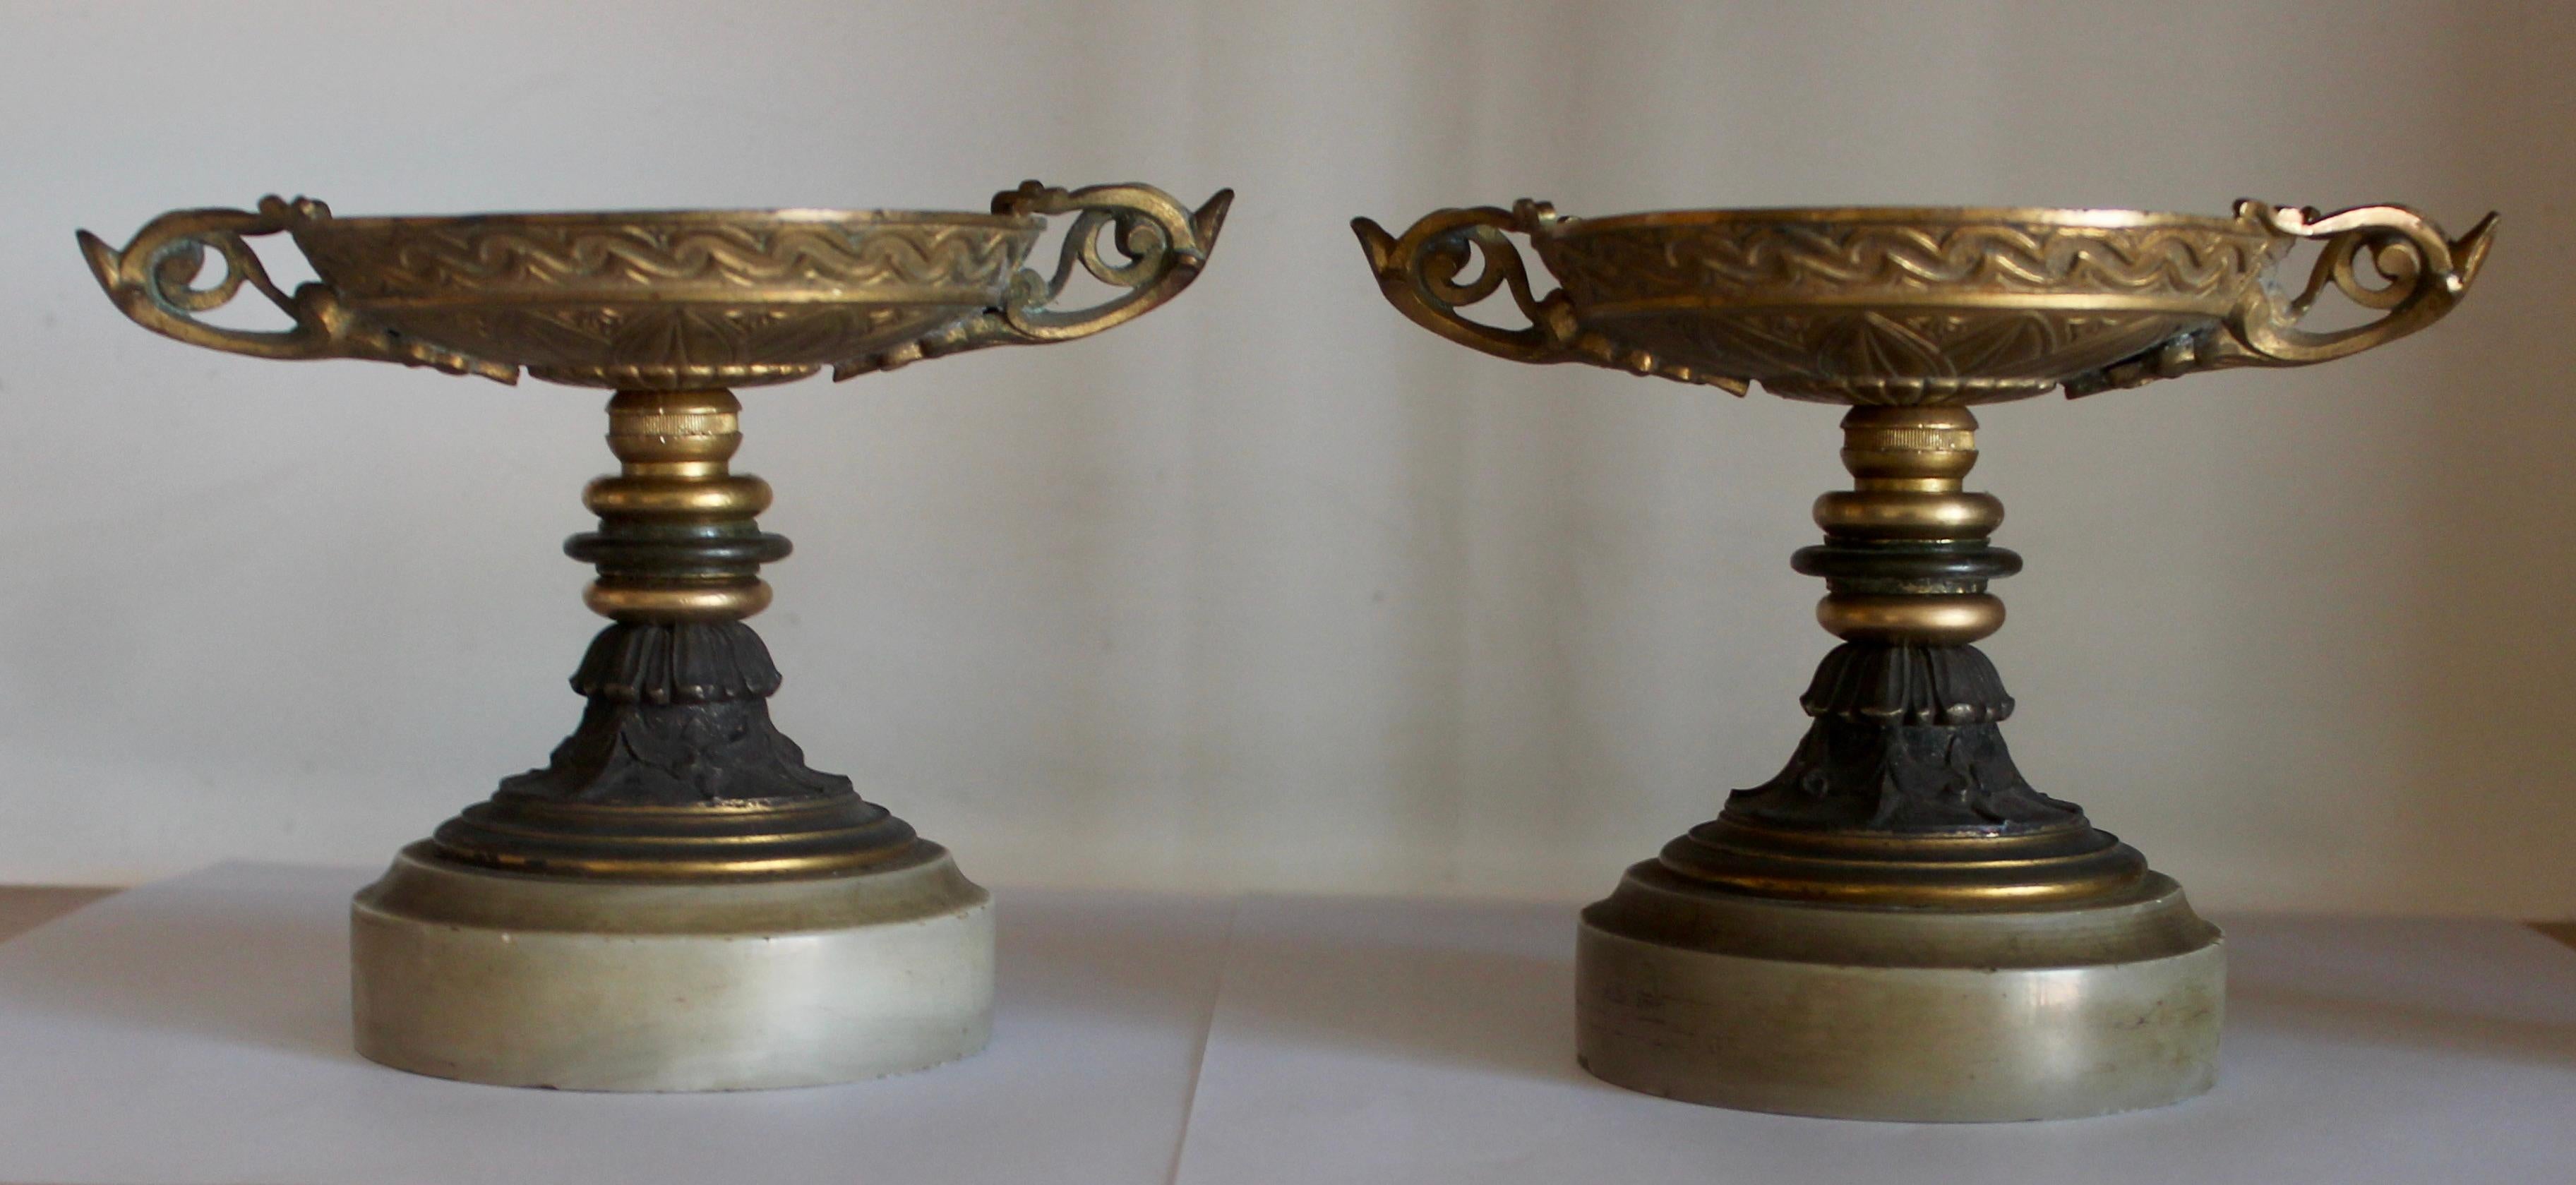 A French 19th century pair of Tazzas
Ormolu and patinated bronze on onyx bases
neoclassical design,
circa 1890.